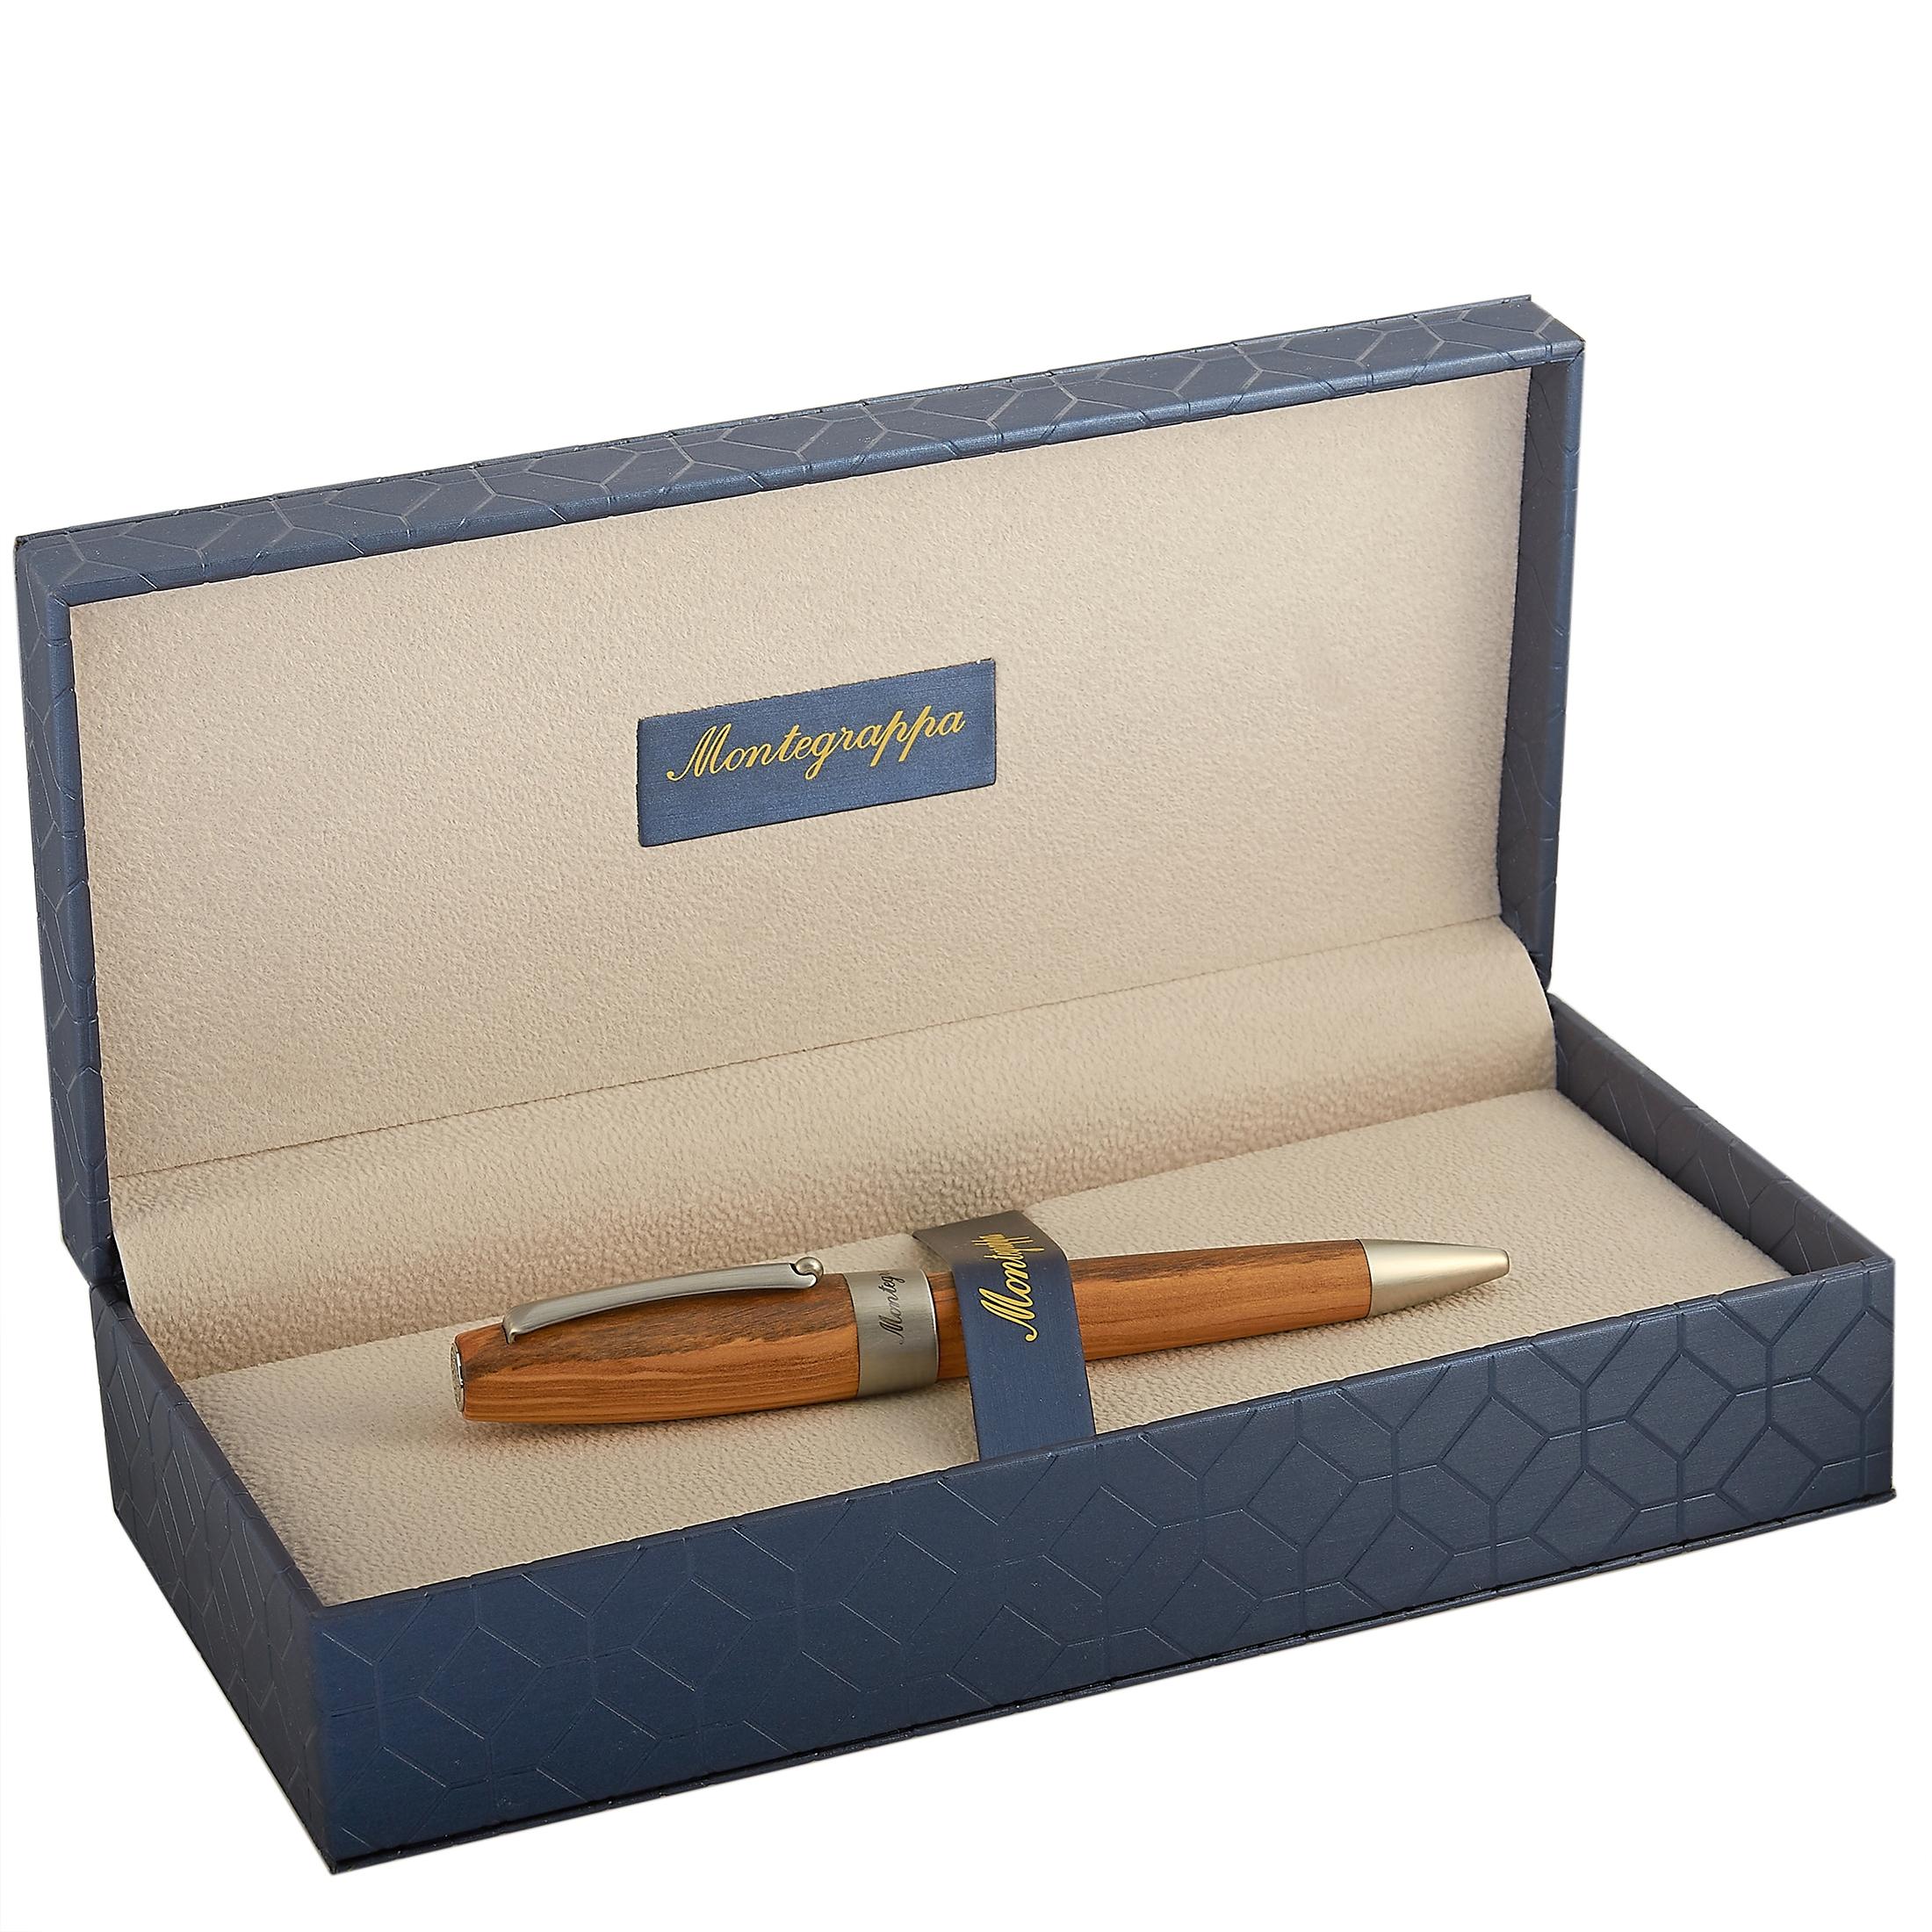 The Montegrappa “Heartwood” ballpoint pen is made out of olive wood with stainless steel trim, and boasts the famous “1912” logo on the cap top. The pen weighs 41 grams and measures 143 mm in length and 15.6 mm in diameter.